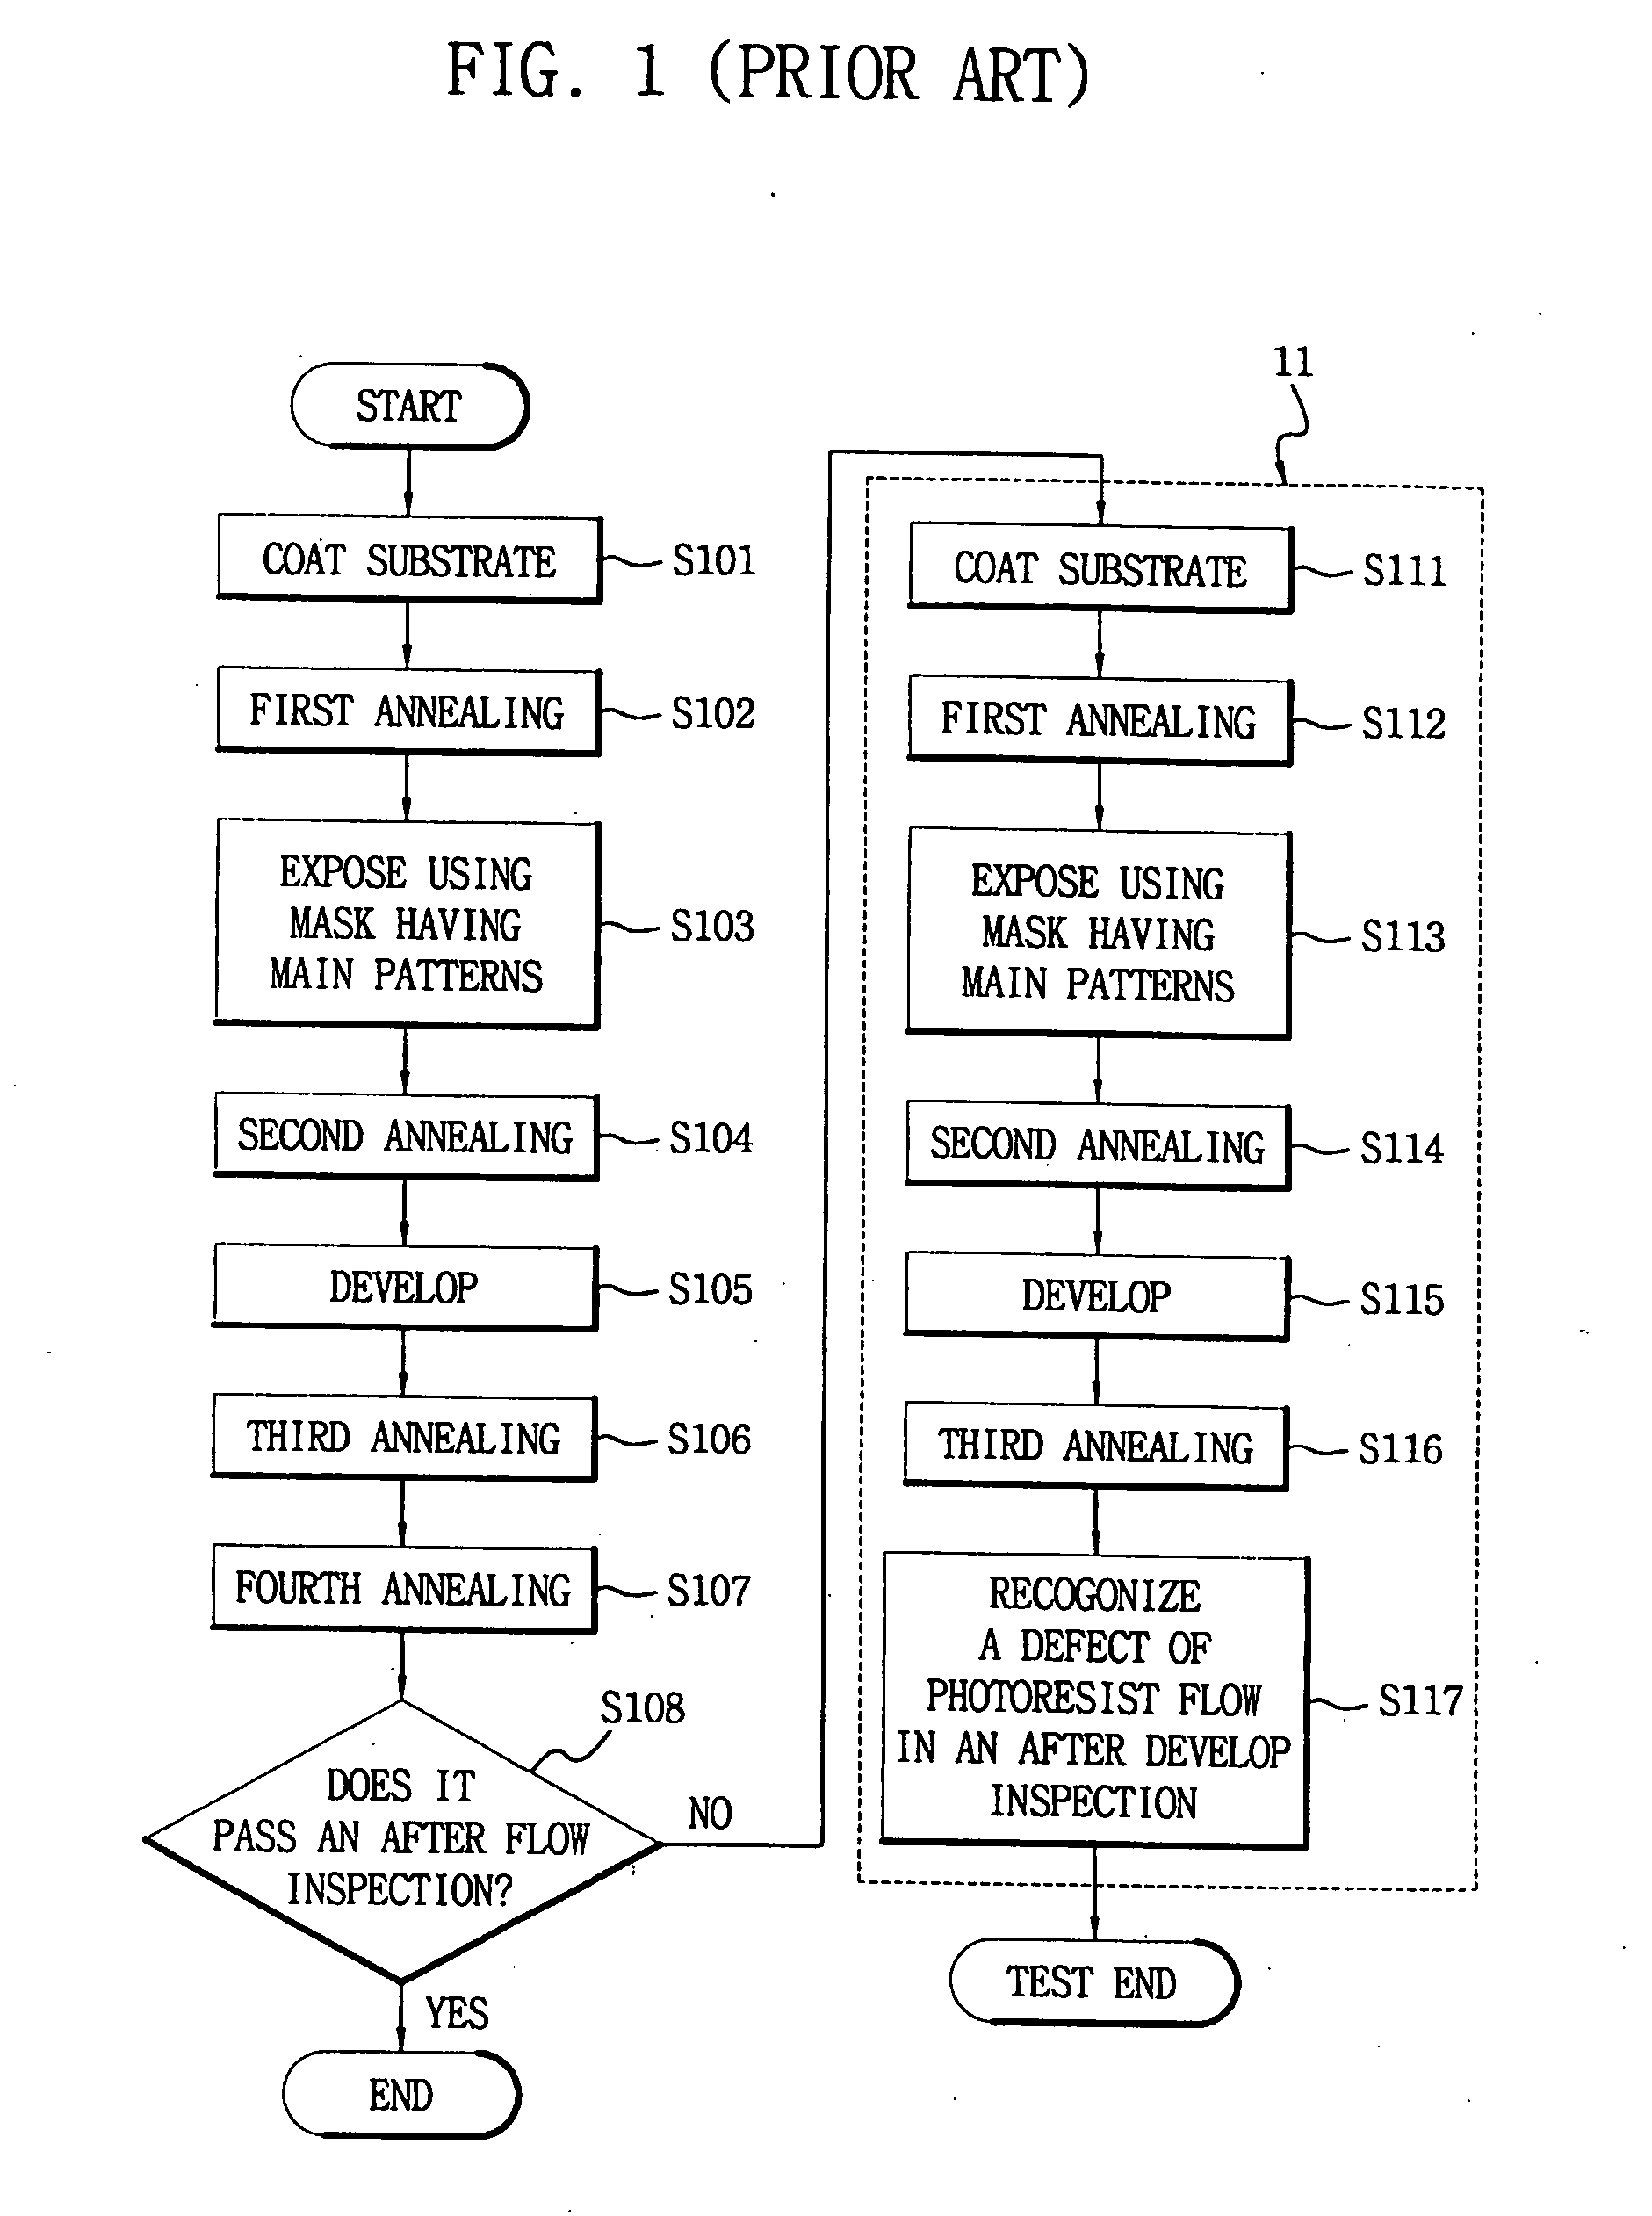 Photoresist pattern, method of fabricating the same, and method of assuring the quality thereof